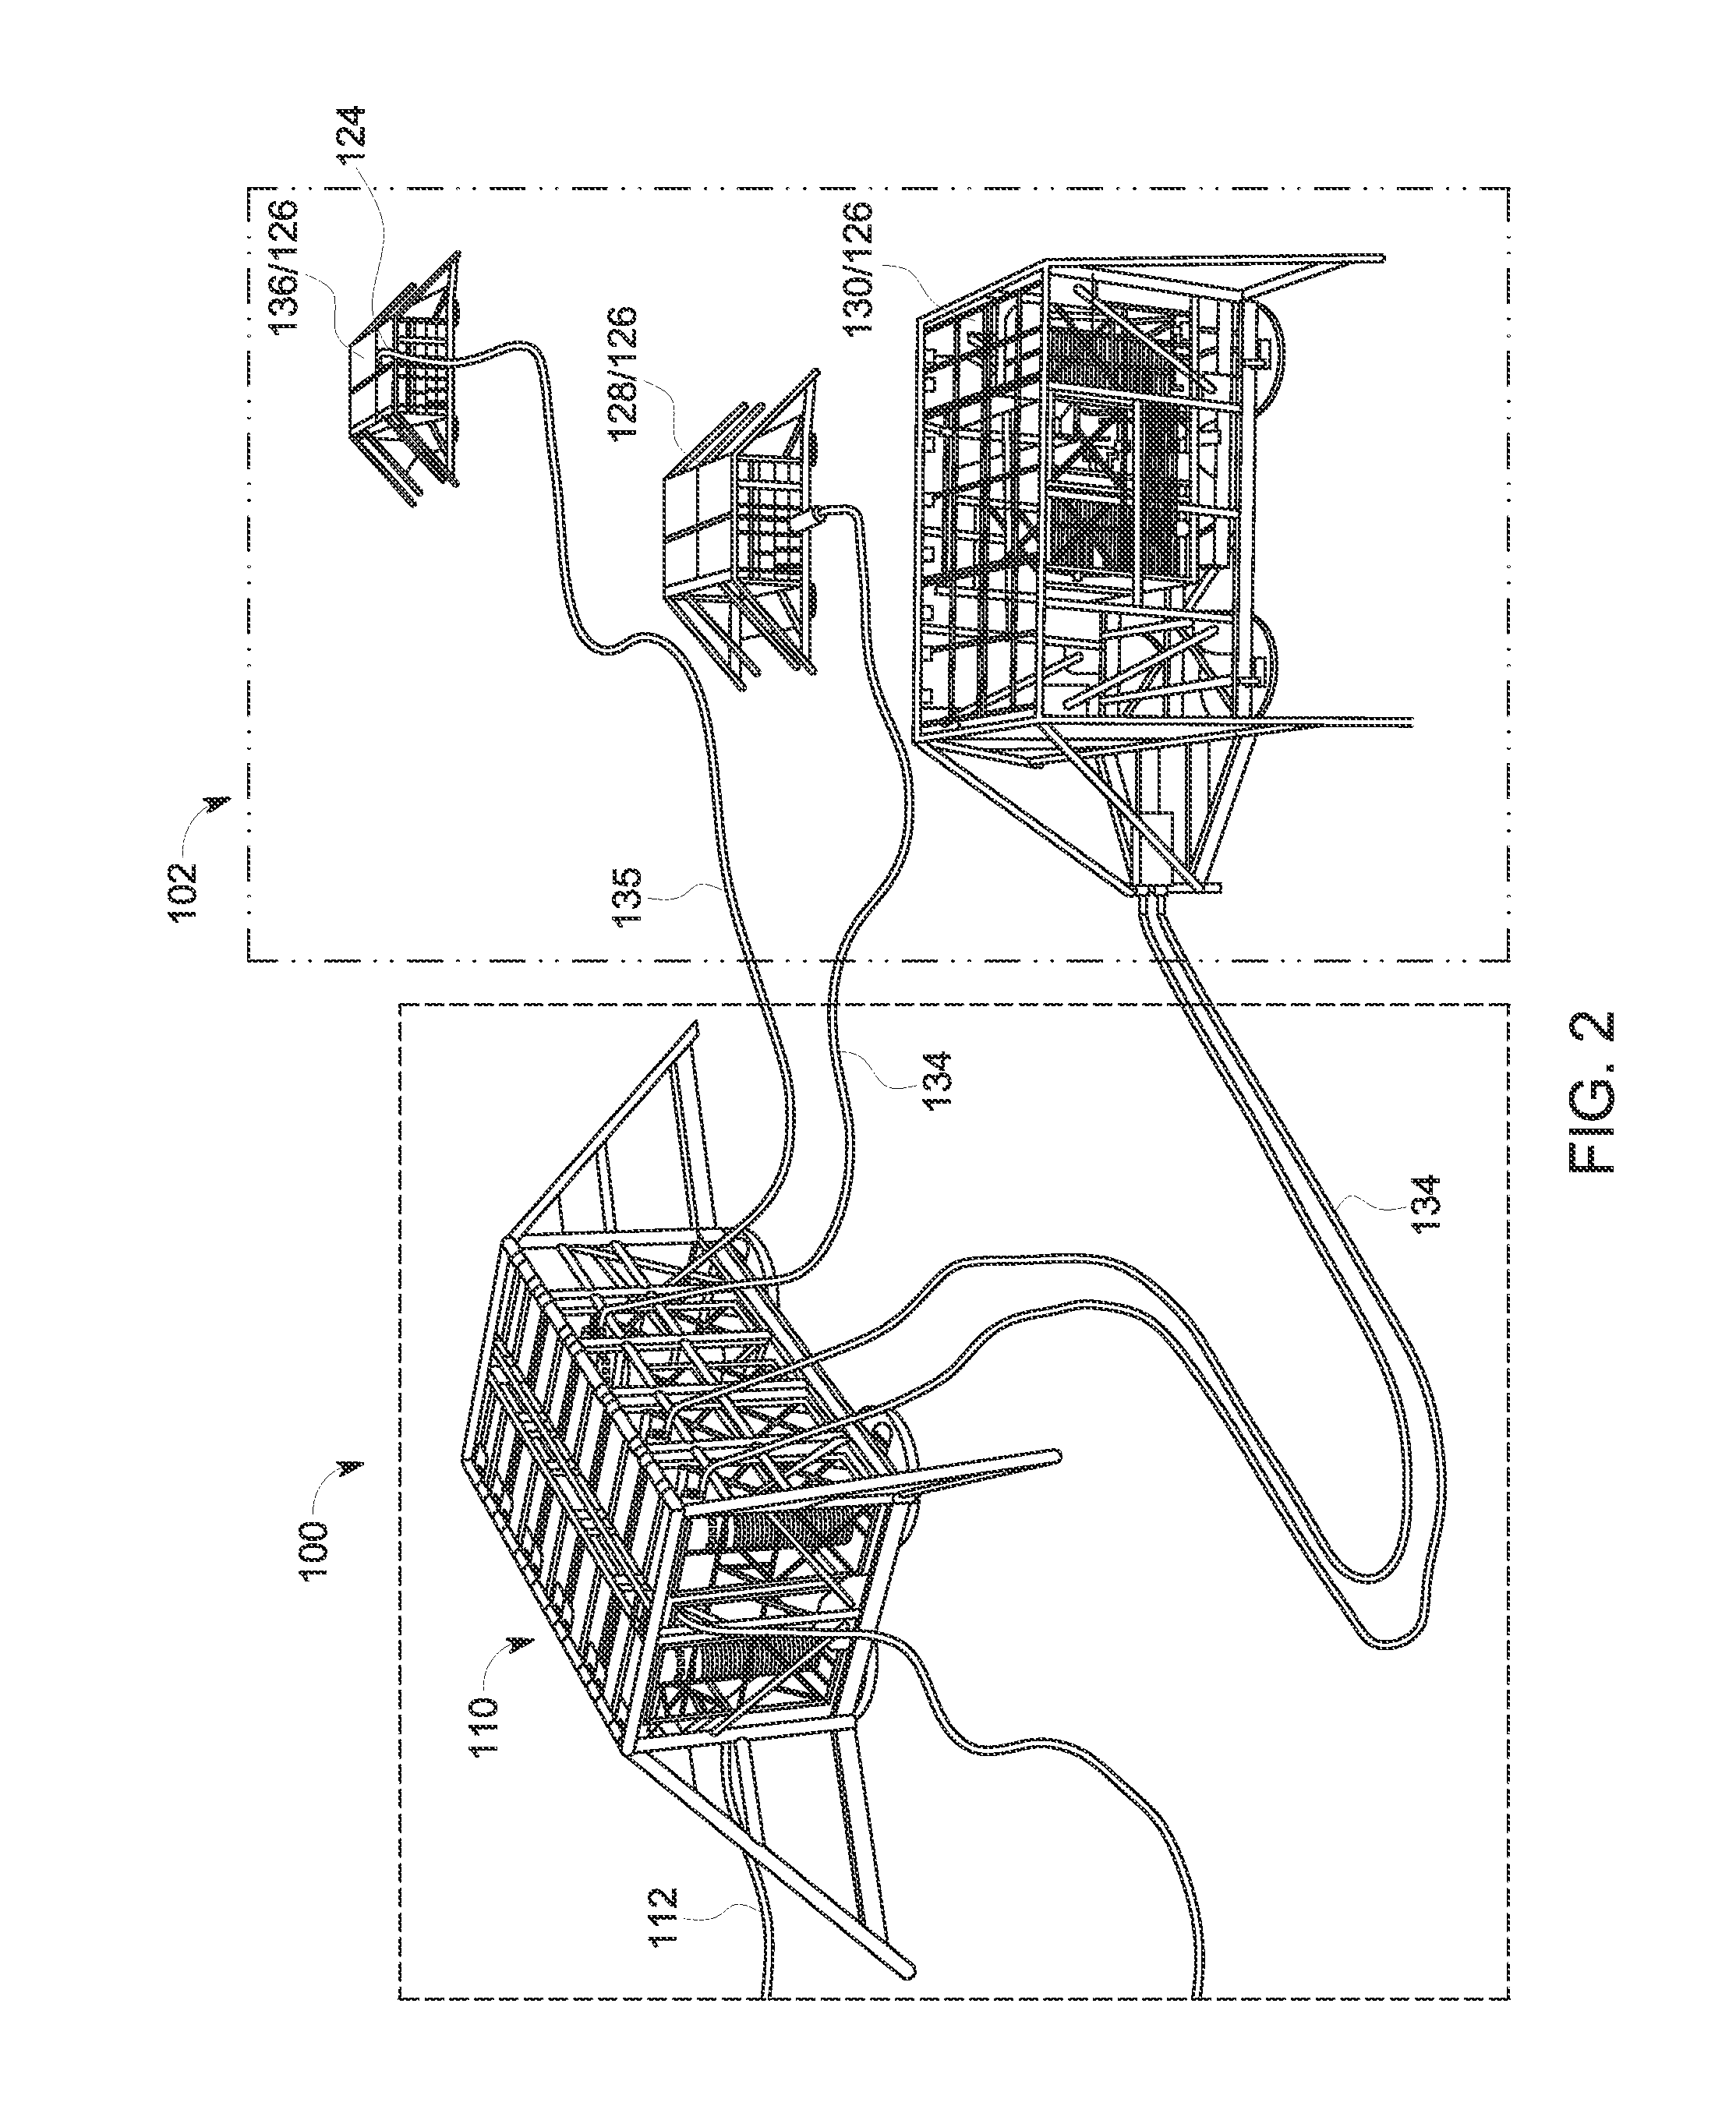 Submersible power distribution system and methods of assembly thereof